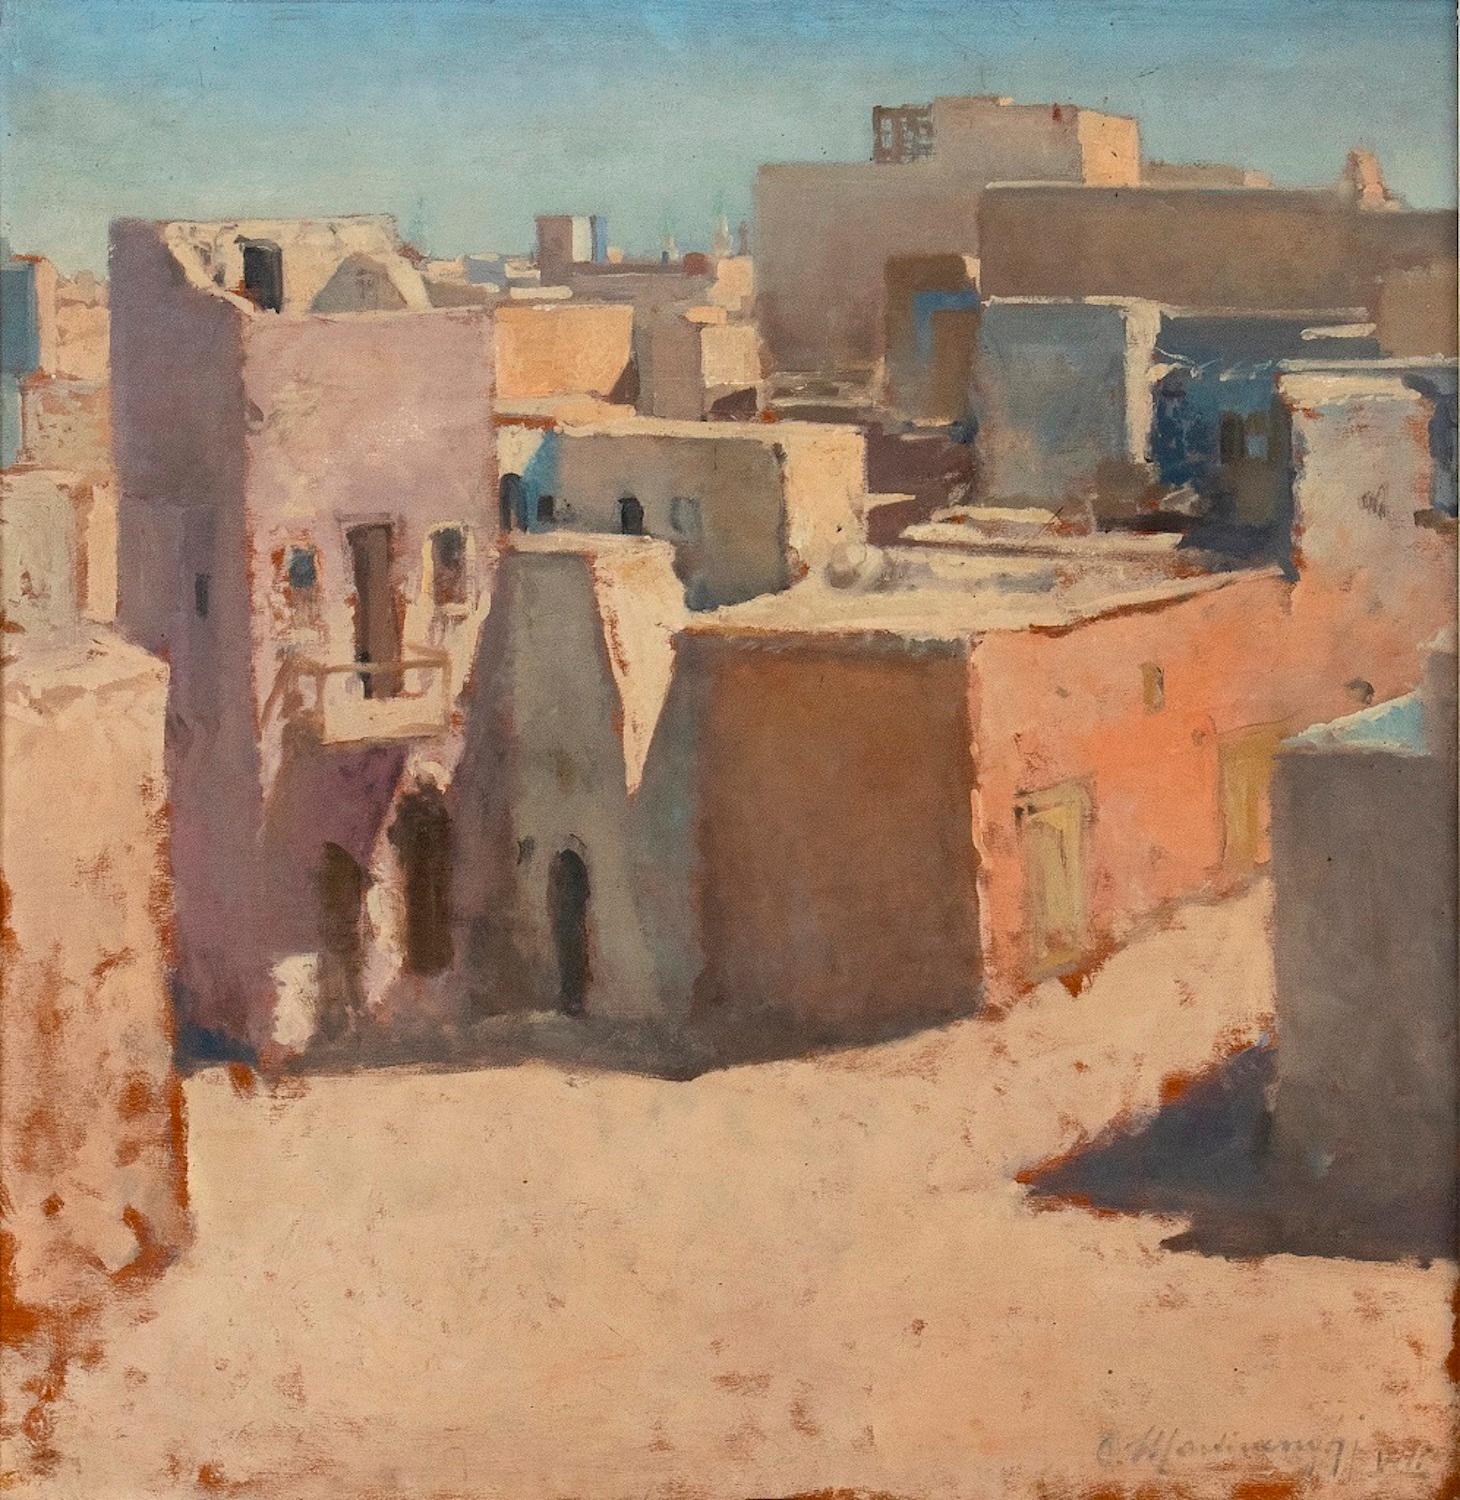 Claudio Martinenghi Figurative Painting - View of the Old Tripoli - Oil on Board - 1972